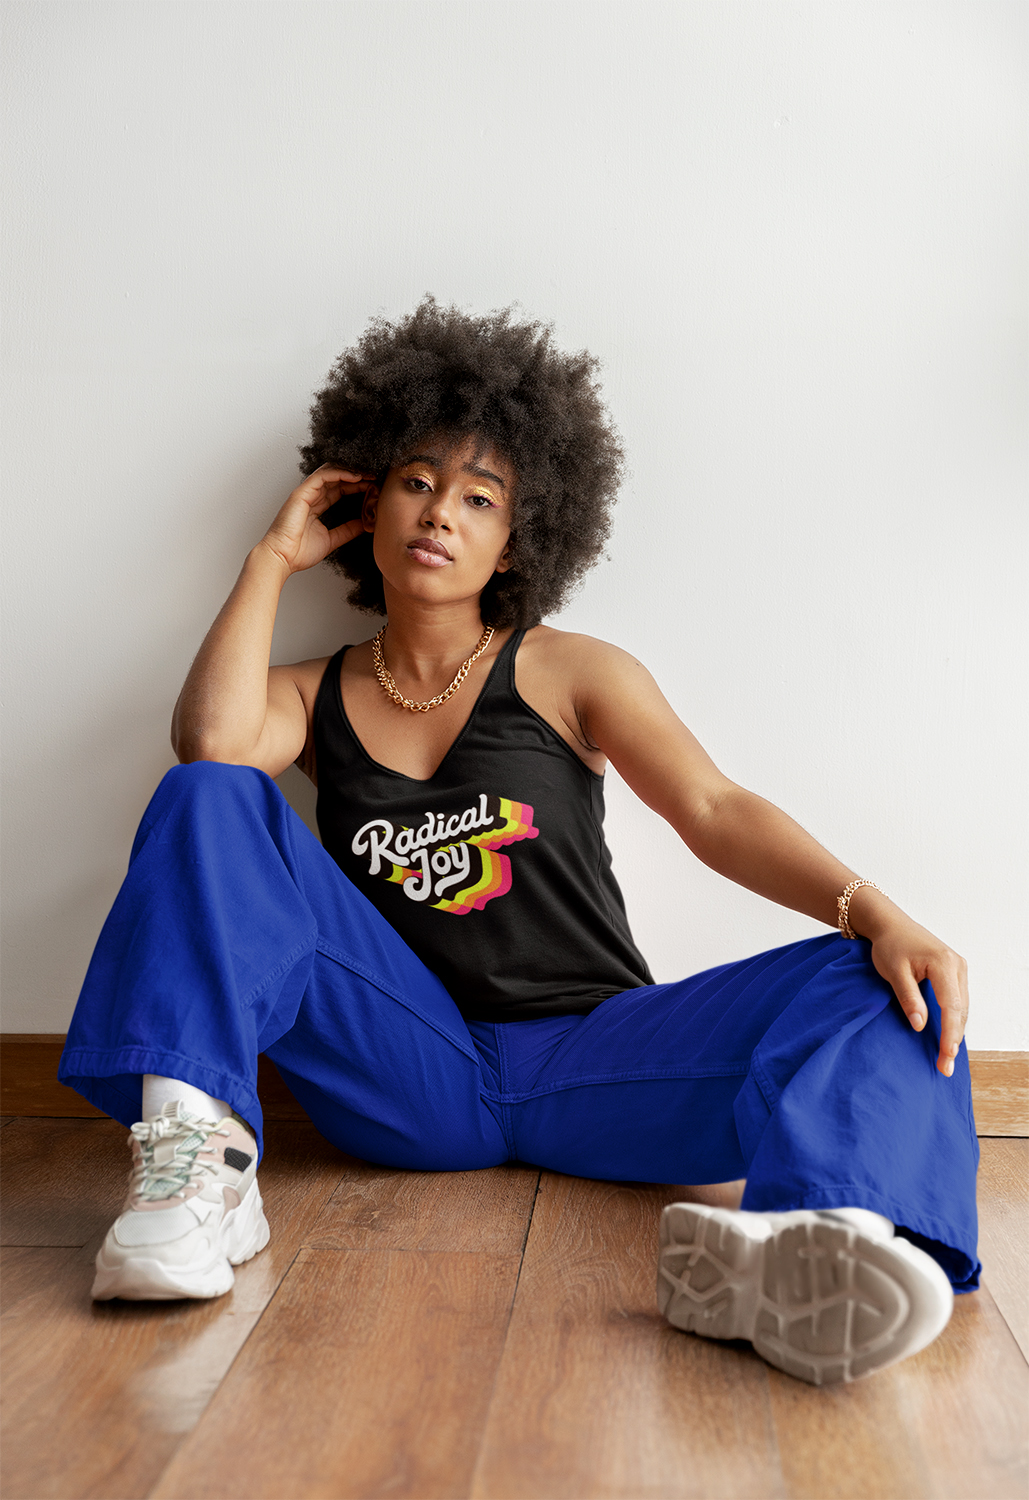 woman in a black tank top that reads "Radical Joy" with blue pants